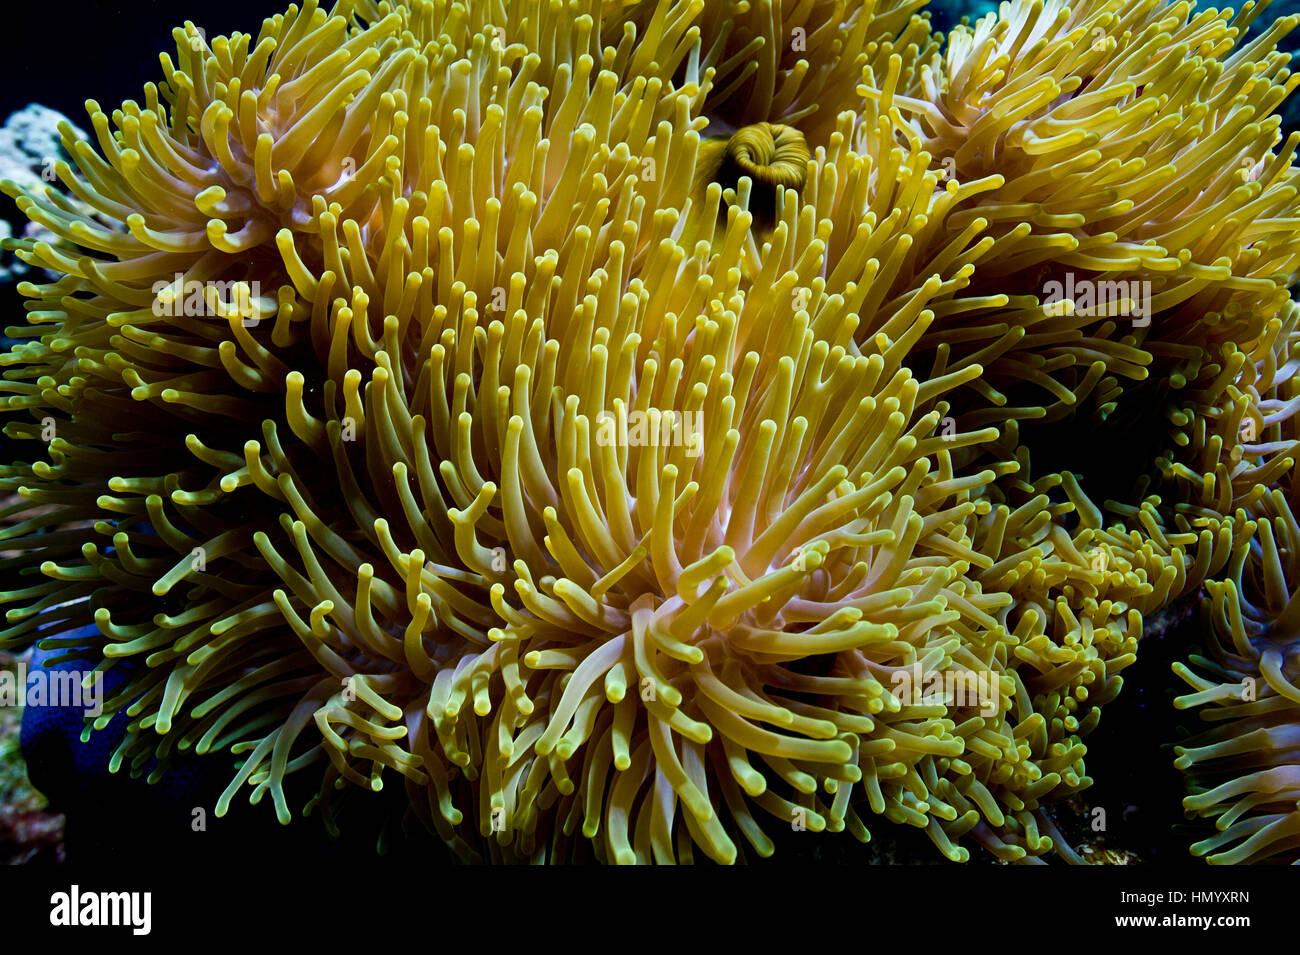 The venomous tentacles of a sea anemone living on a coral reef. Stock Photo